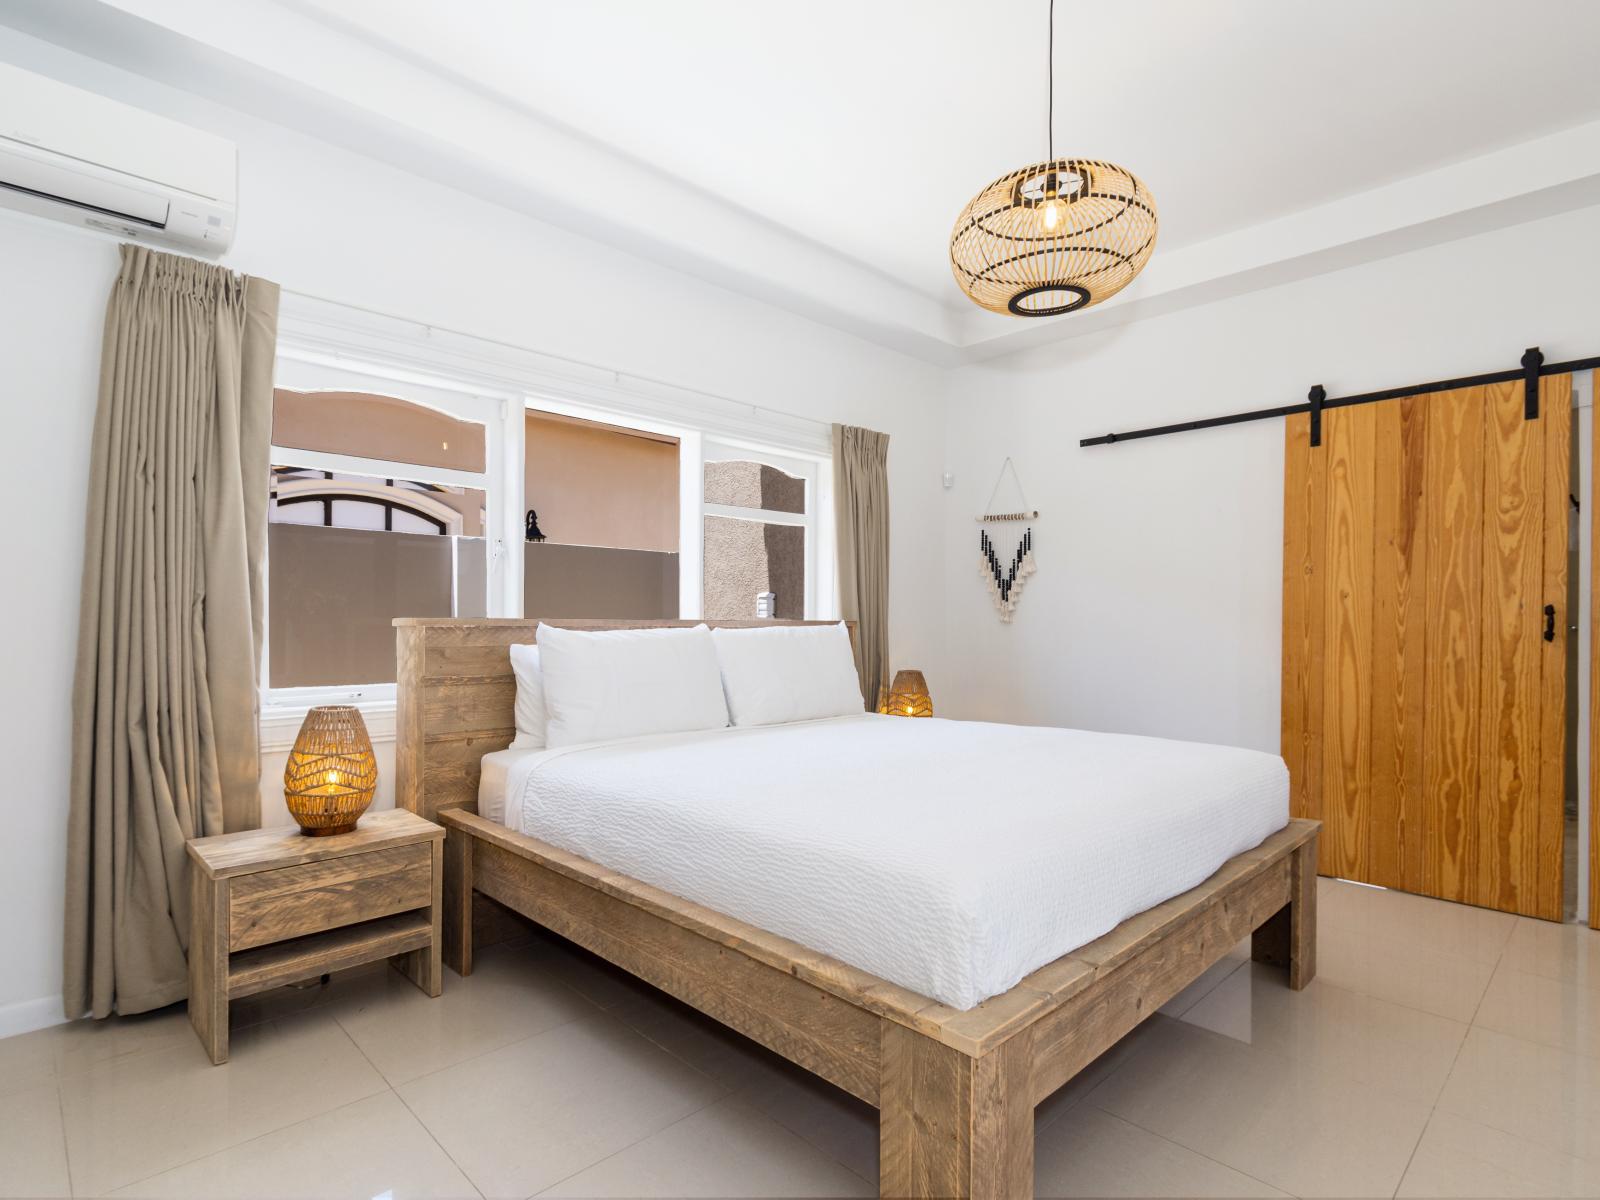 Imposing Bedroom of the Apartment in Noord Aruba - Smart TV and Netflix - Cozy retreat with a plush bed, perfect for relaxation - Minimalist decor, creating a clean and uncluttered sleeping space